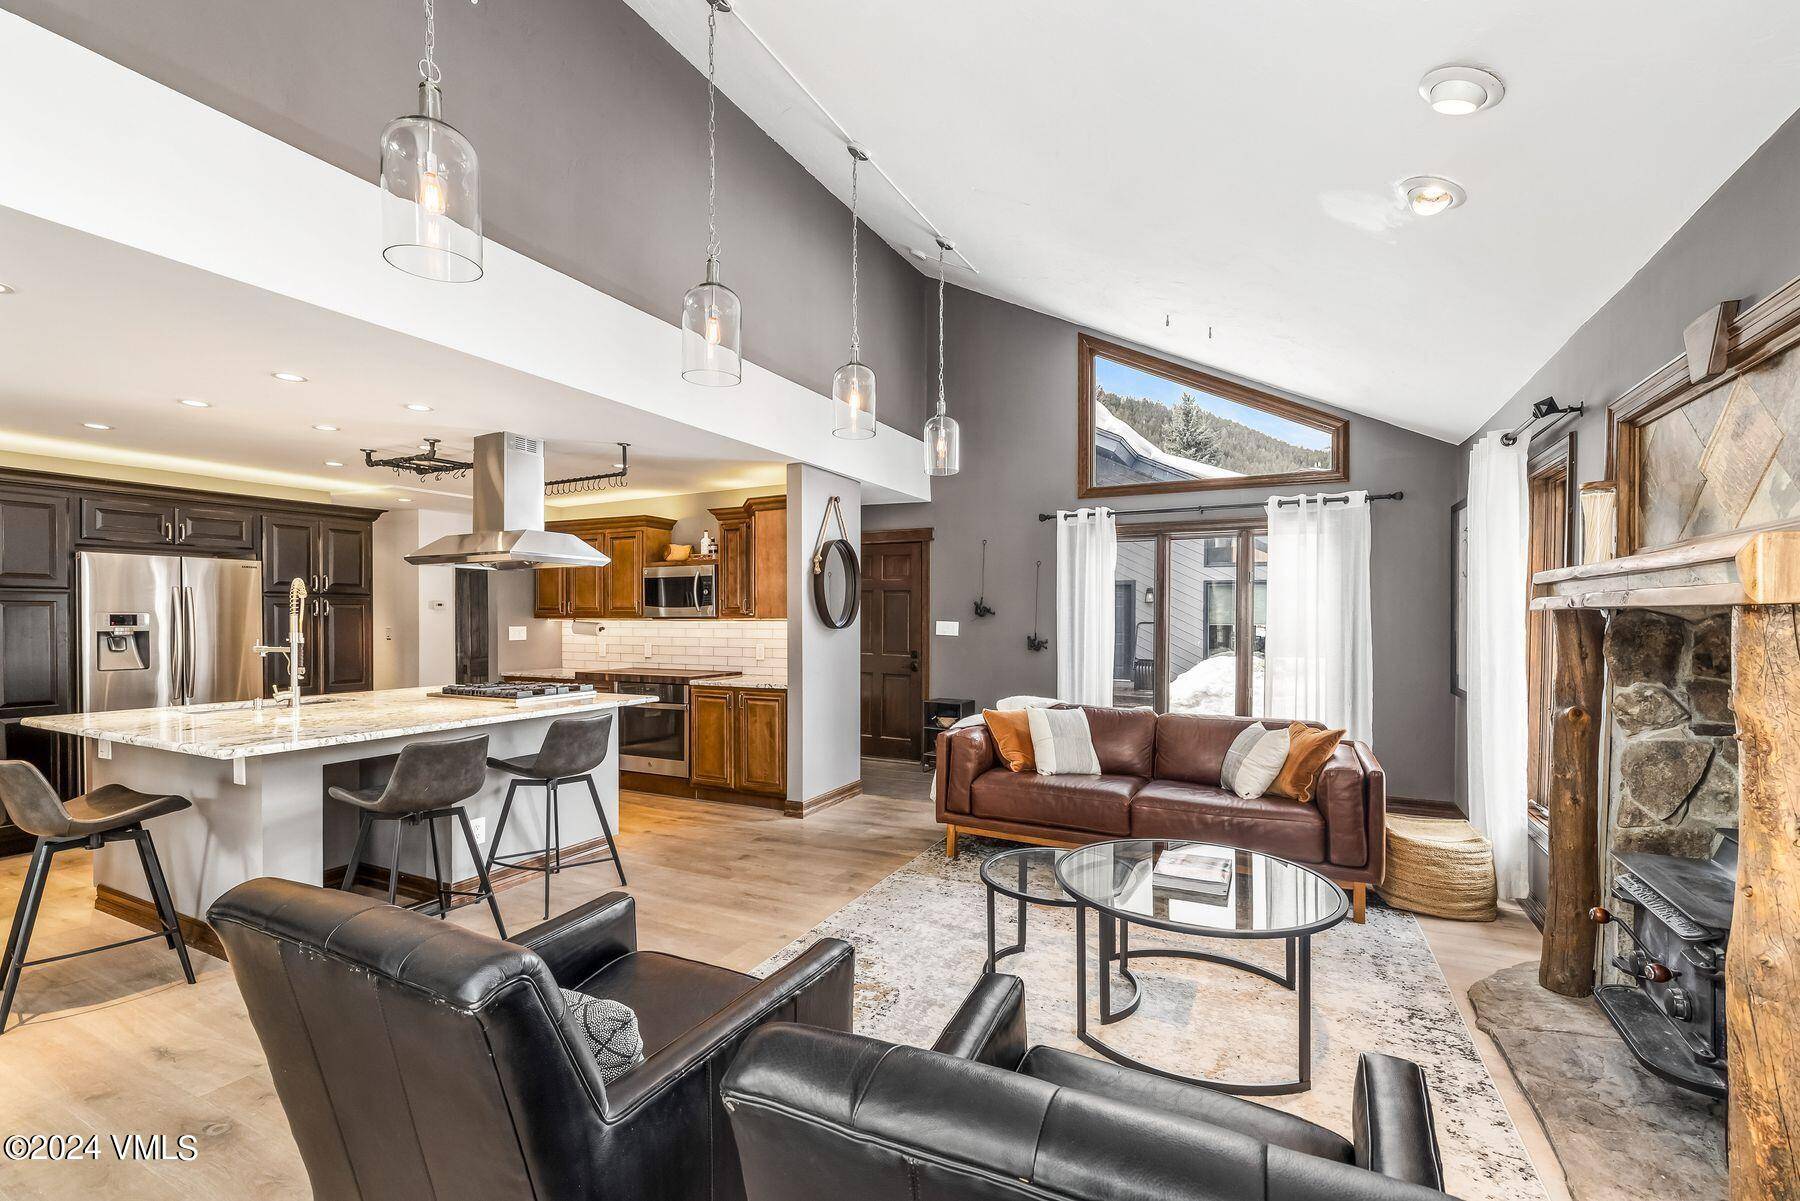 Discover the perfect blend of comfort and convenience with this stunning 3 bedroom duplex nestled in the heart of the vibrant Eagle Vail community.